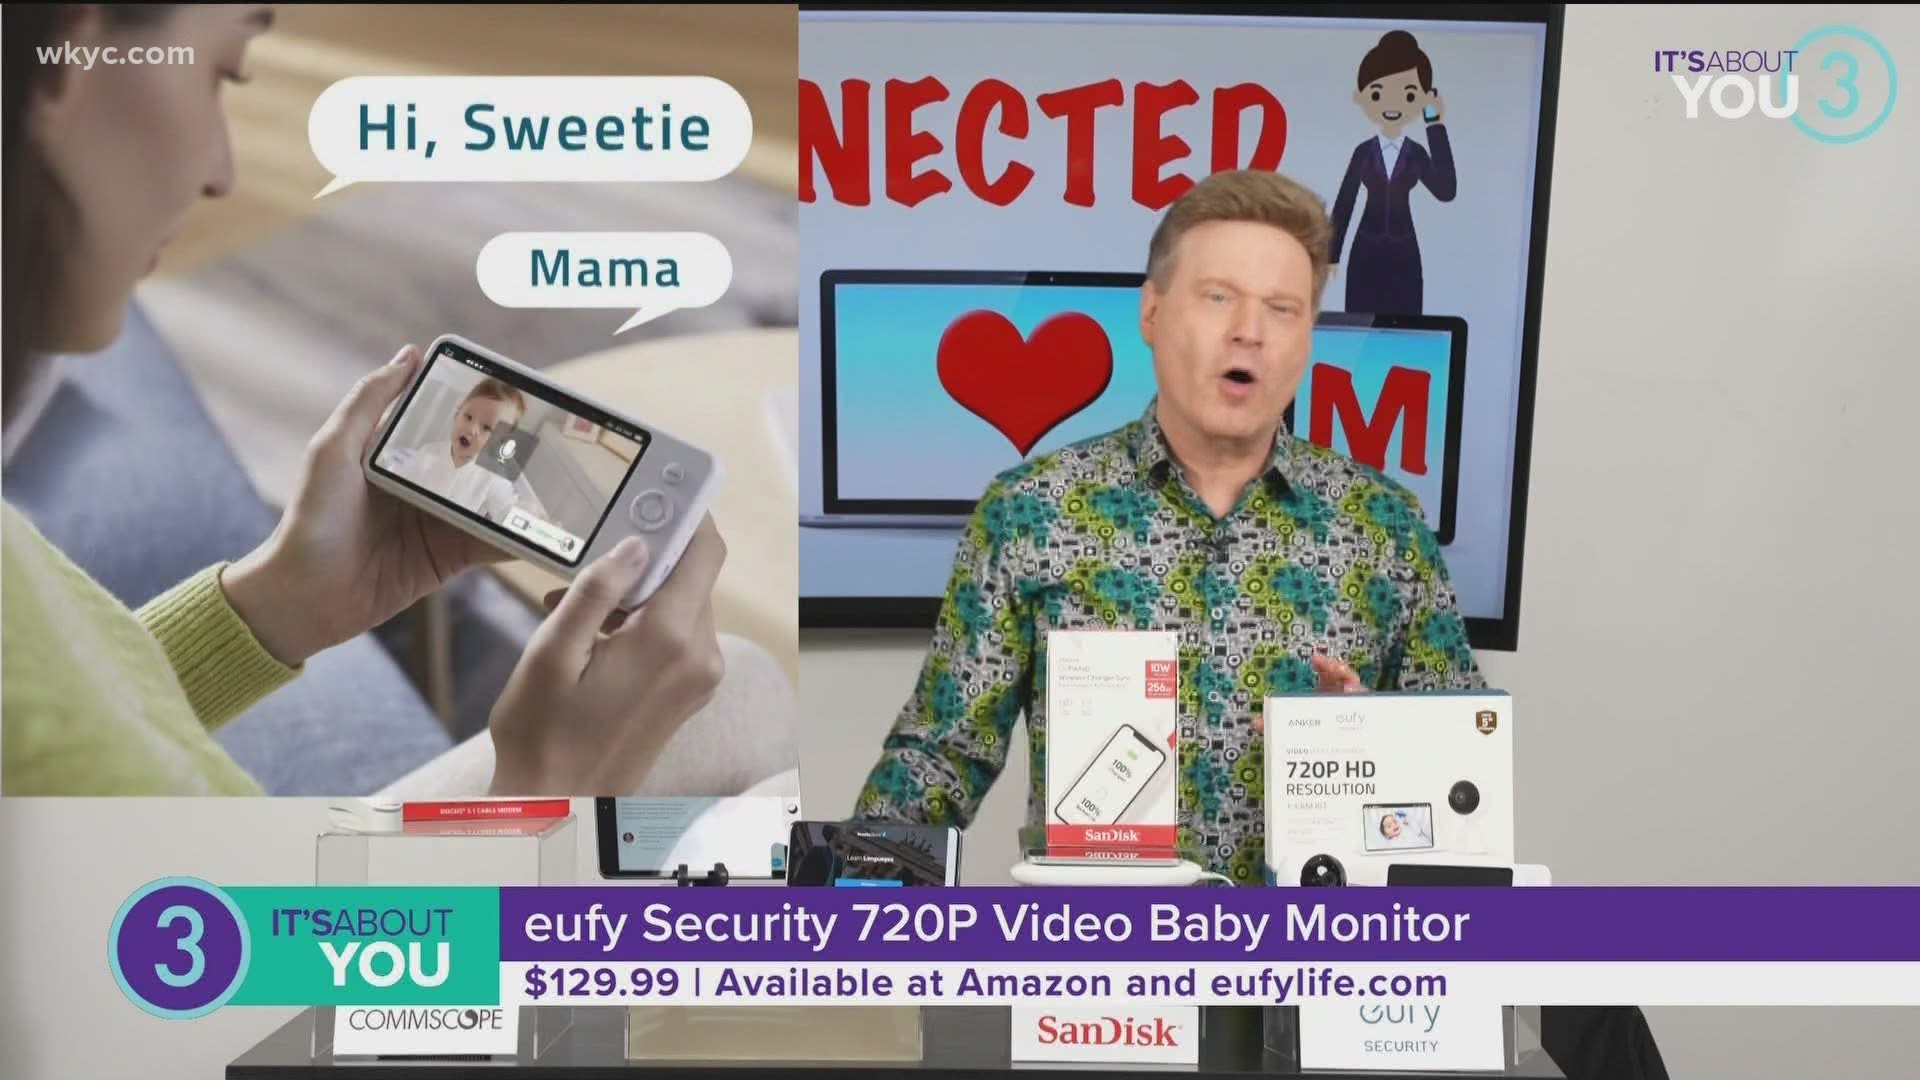 David Gregg is here to show us some amazing products that are perfect for new moms and juggling a family!